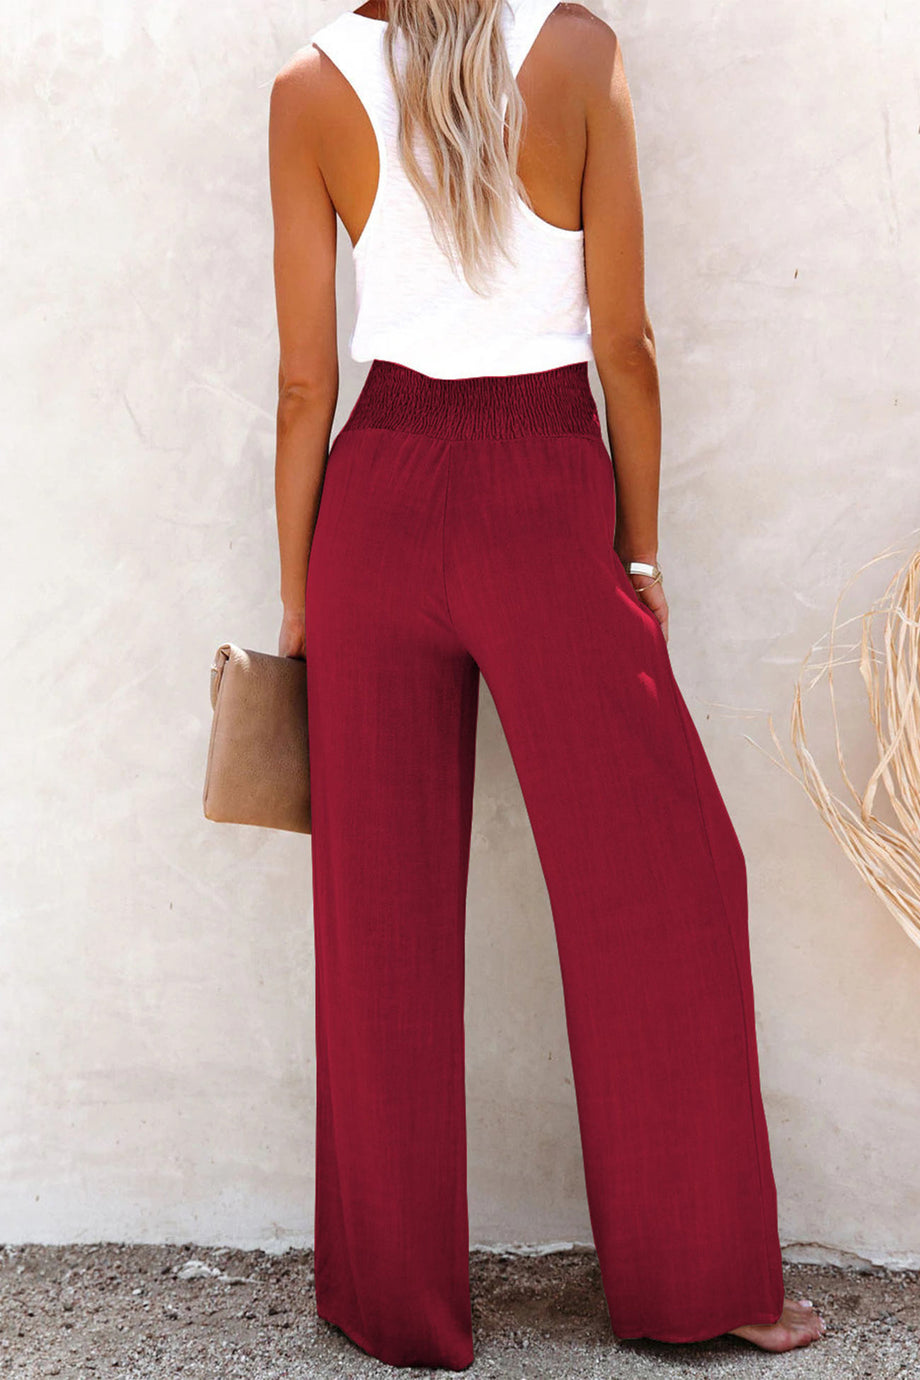 Cute Burgundy Red Pants | Holiday Dress Pants | Cute Christmas Pants | Lily  Boutique